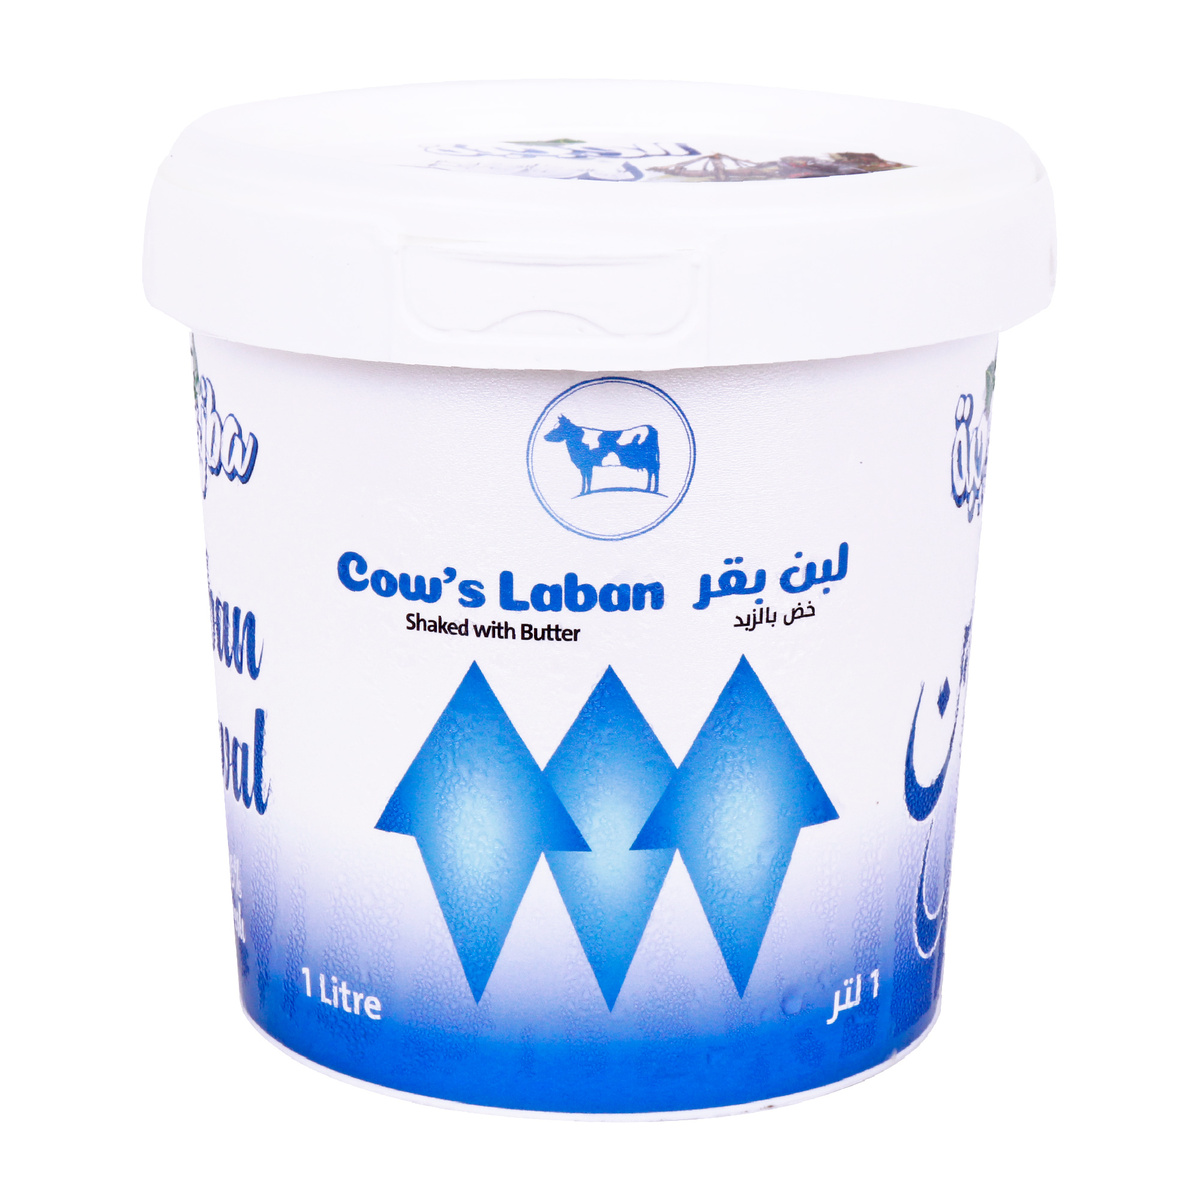 Al Wajba Cow's Laban Shaked With Butter 1Litre